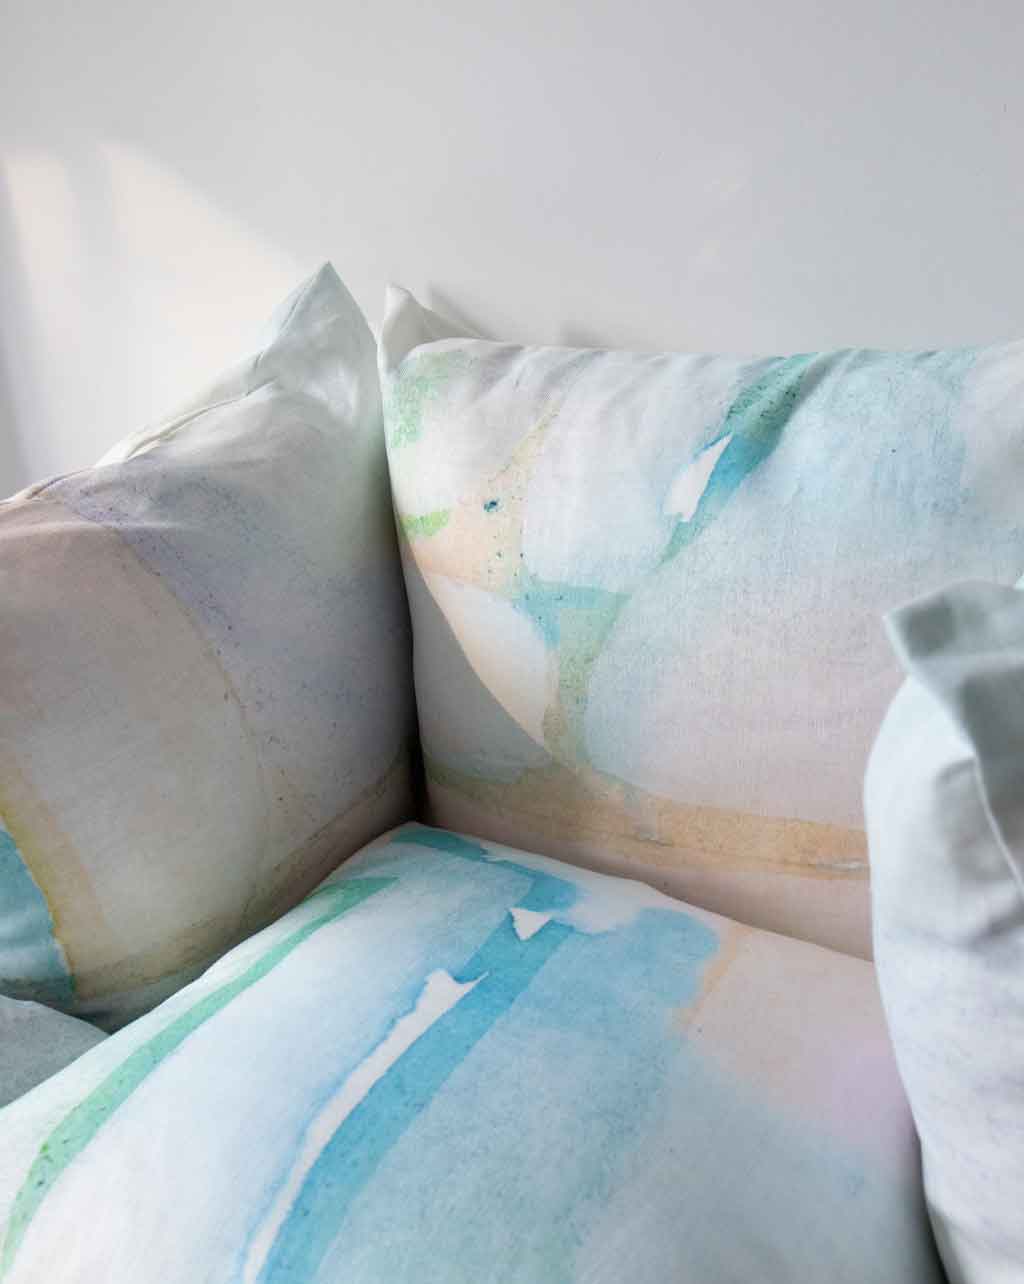 A pair of Custom Pillows with watercolor designs patterns on them